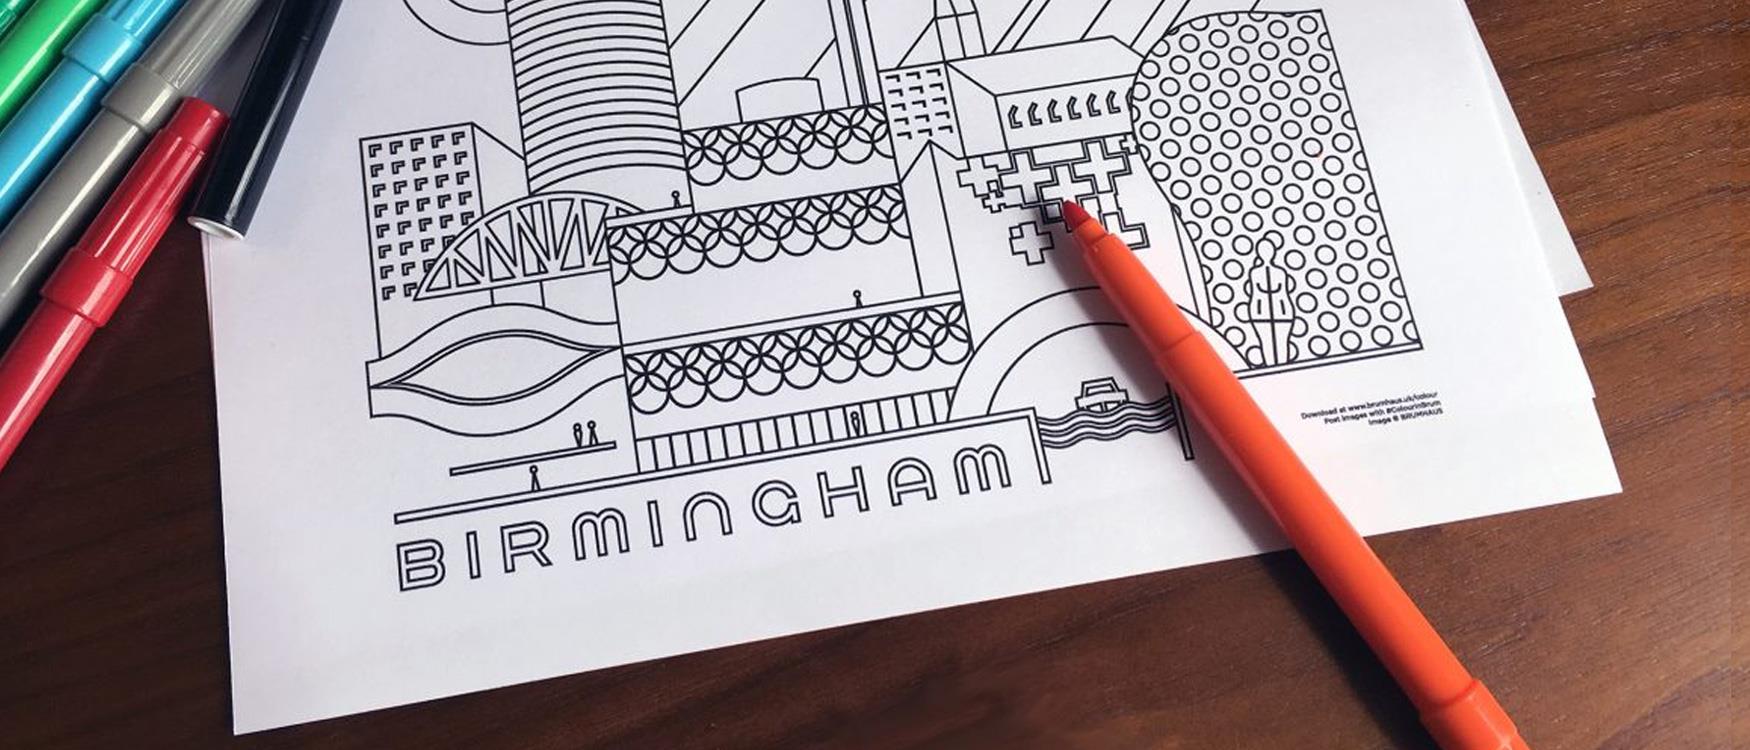 To keep the troops at home busy download Brumhaus free colouring-in sheets.